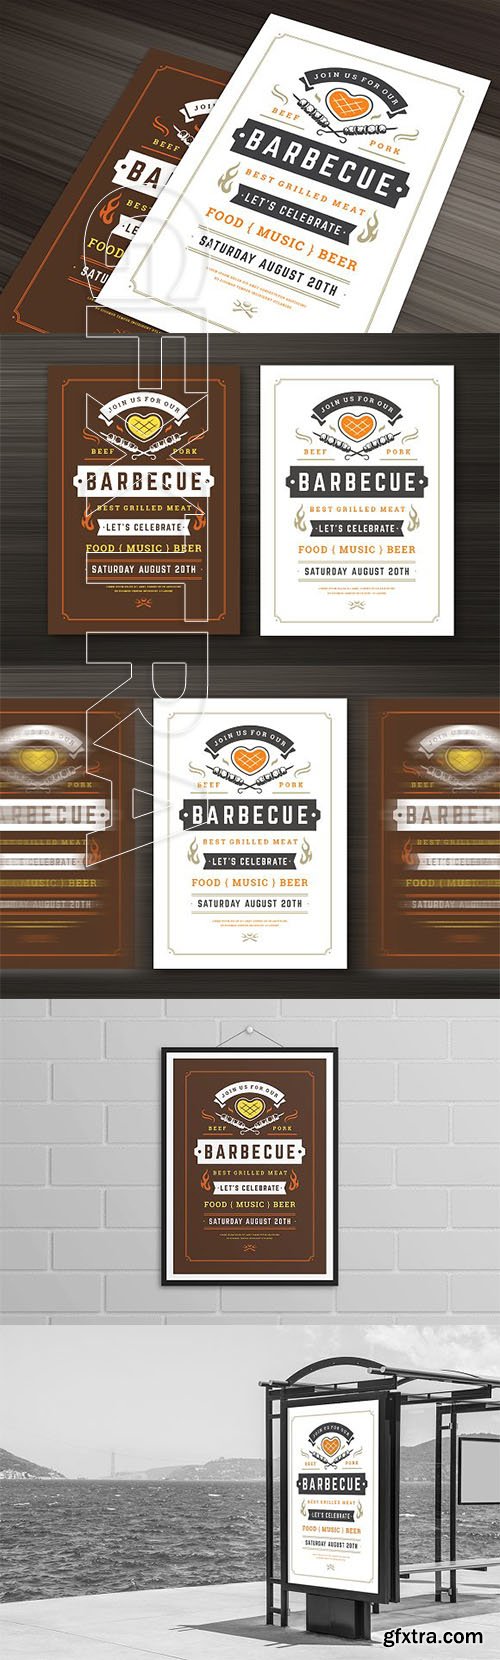 CreativeMarket - Barbecue Party Flyer Template 2634595